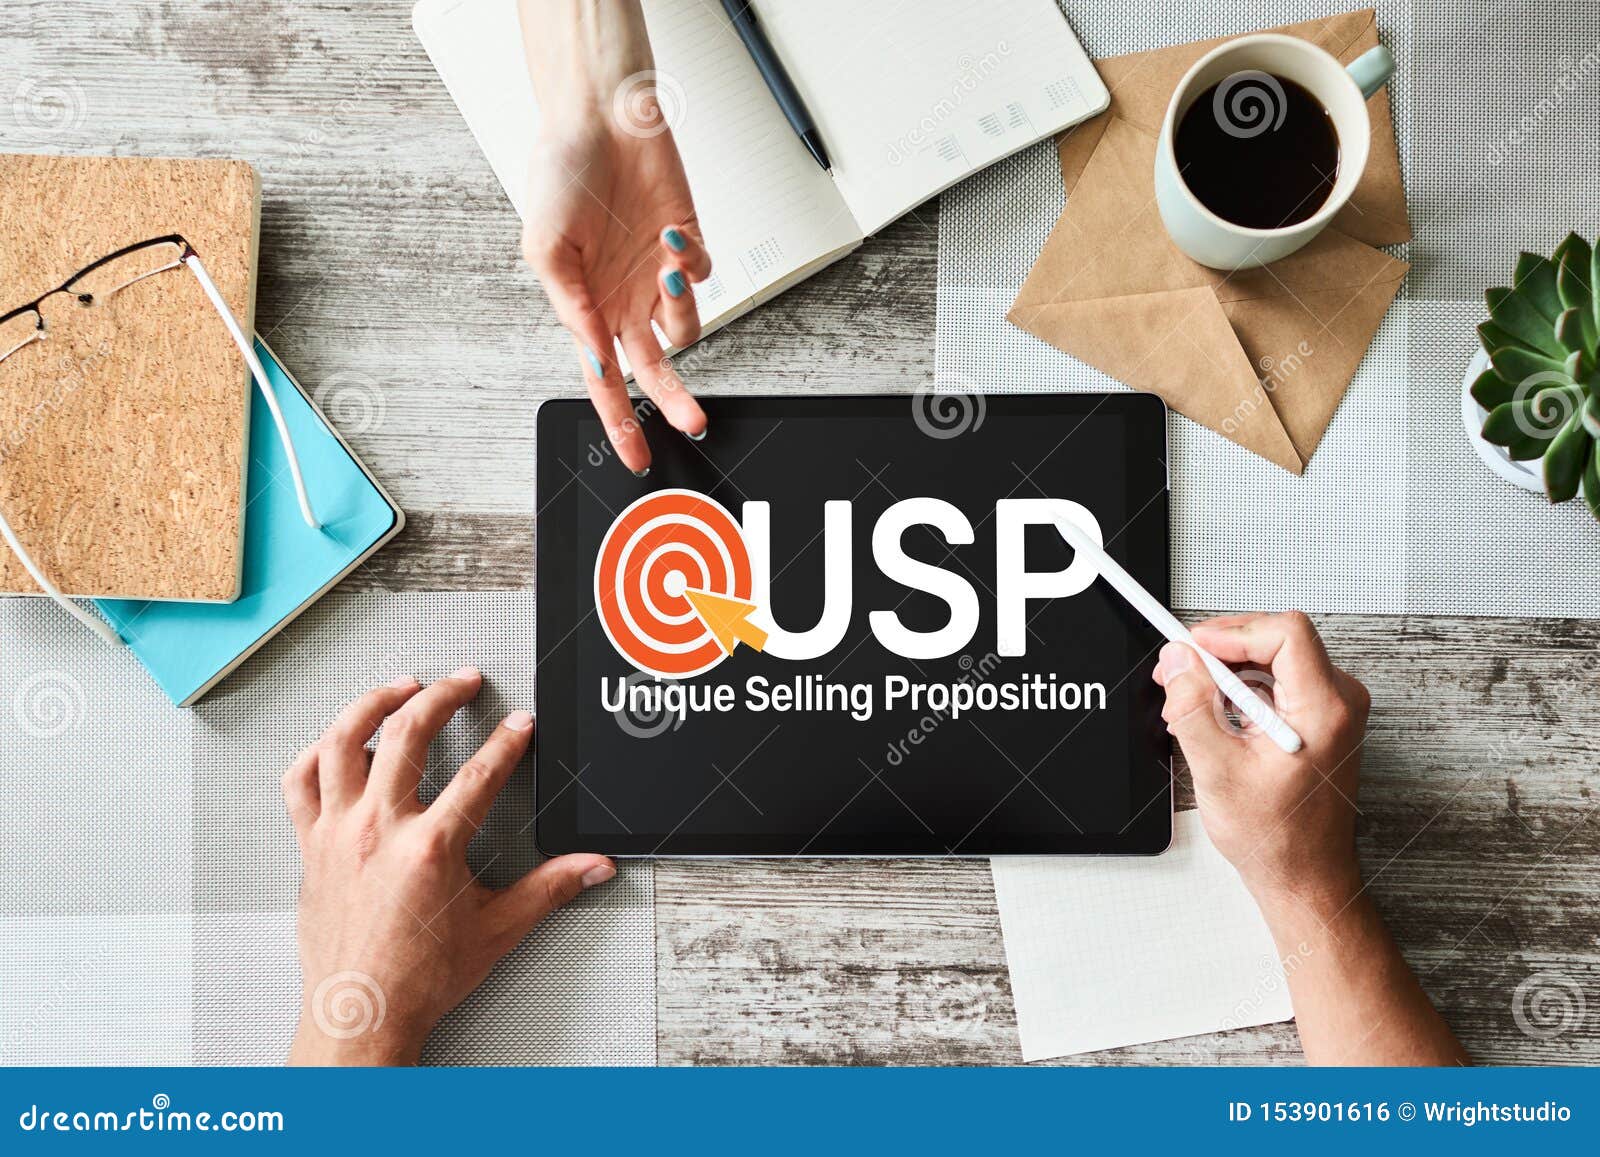 usp - unique selling propositions. business and finance concept on device screen.